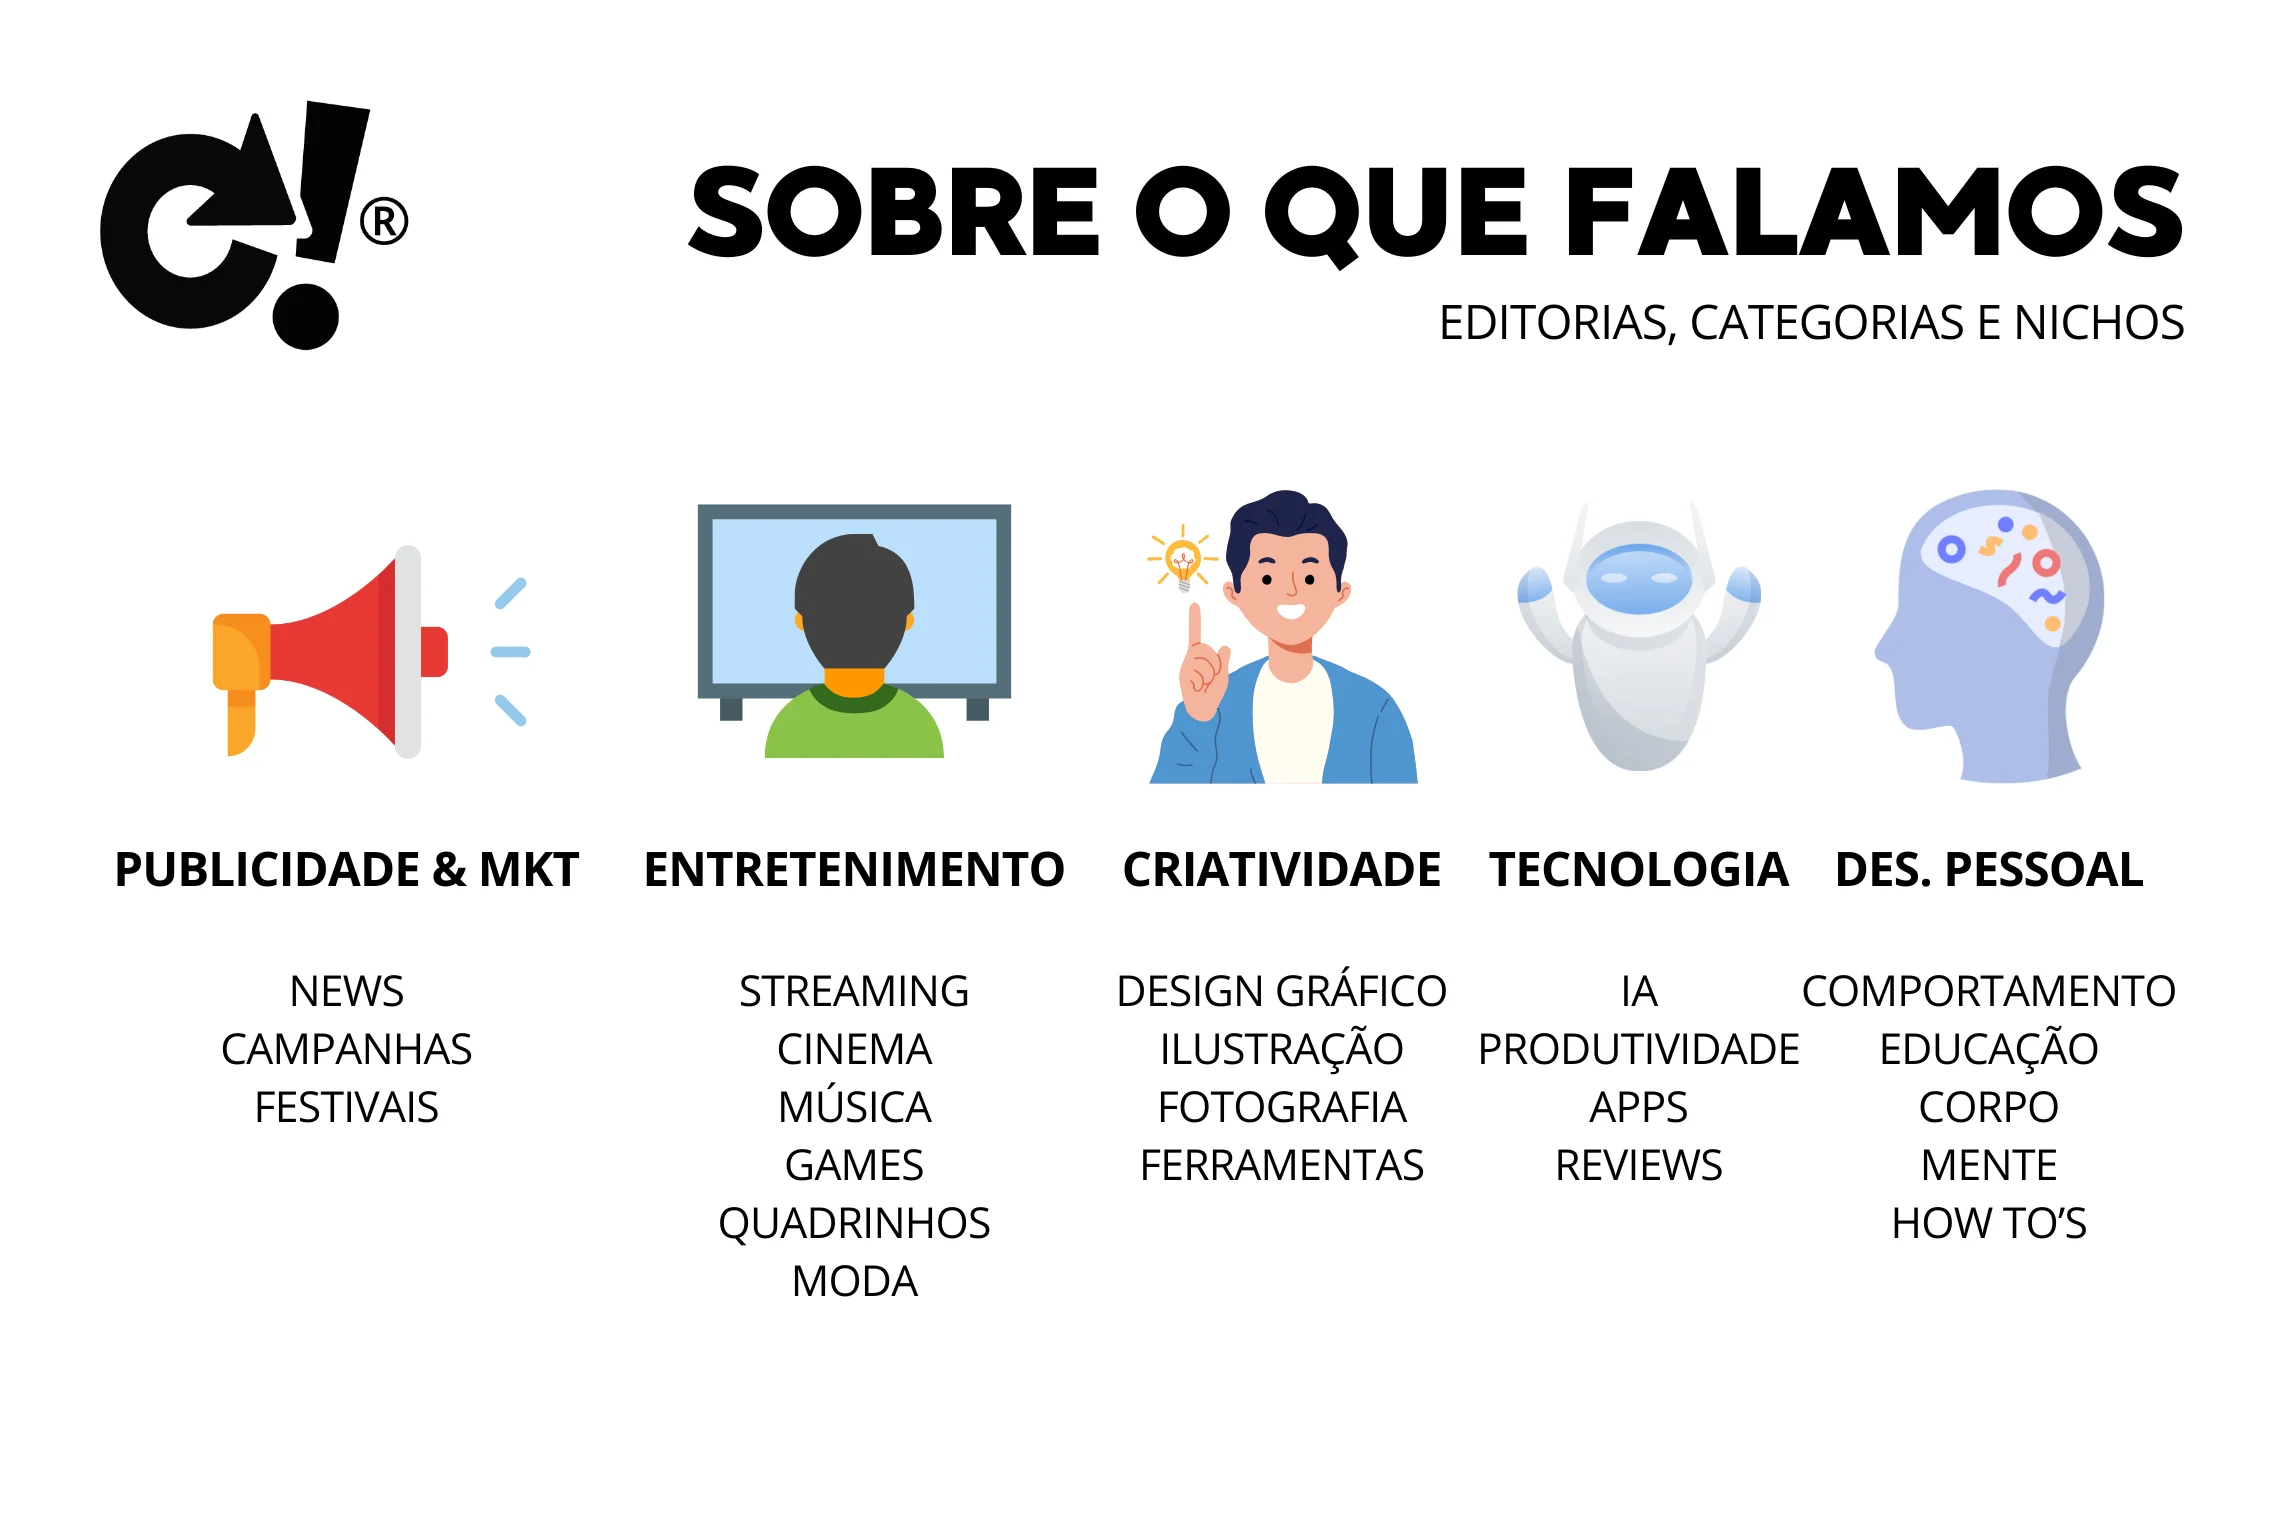 Illustrative infographic in Portuguese highlighting discussion topics categorized under advertising & marketing, entertainment, creativity, technology, and personal development with associated icons and keywords.